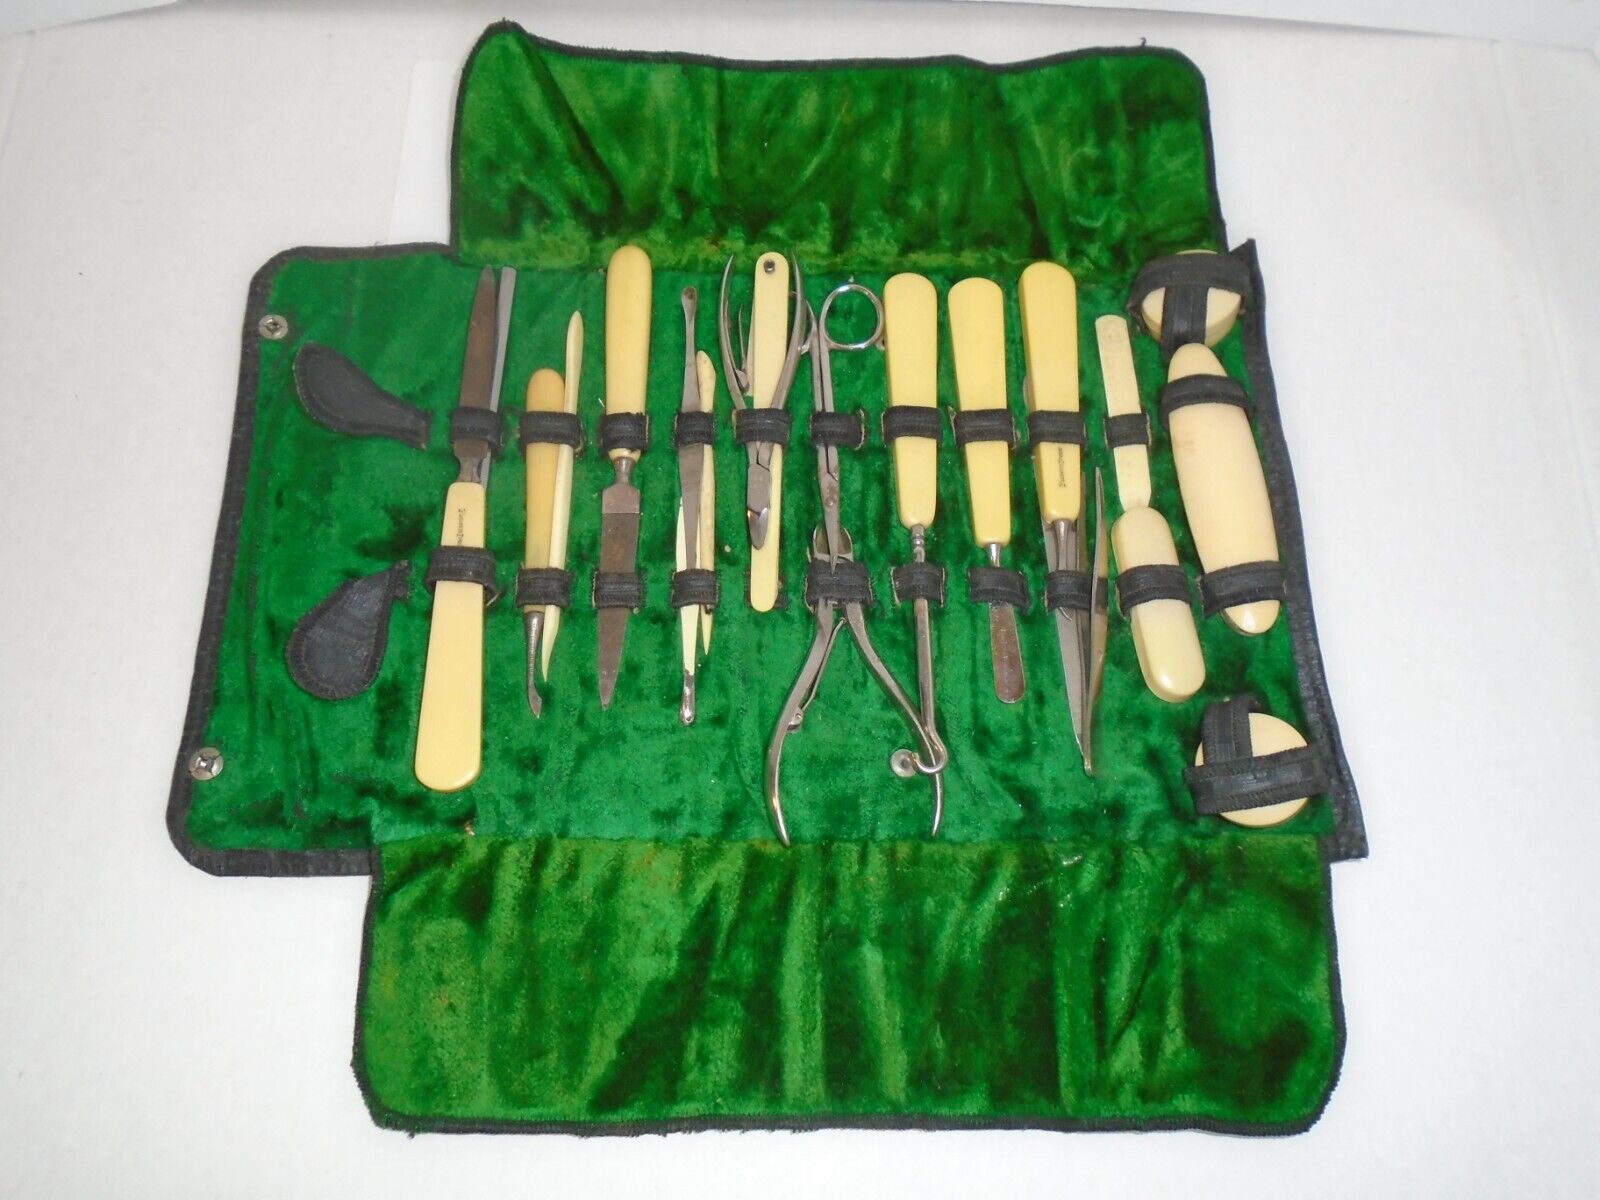 FRENCH IVORY 22 PIECE MANICURE NAIL SET GREEN LINED ROLL UP  -  VINTAGE ANTIQUE